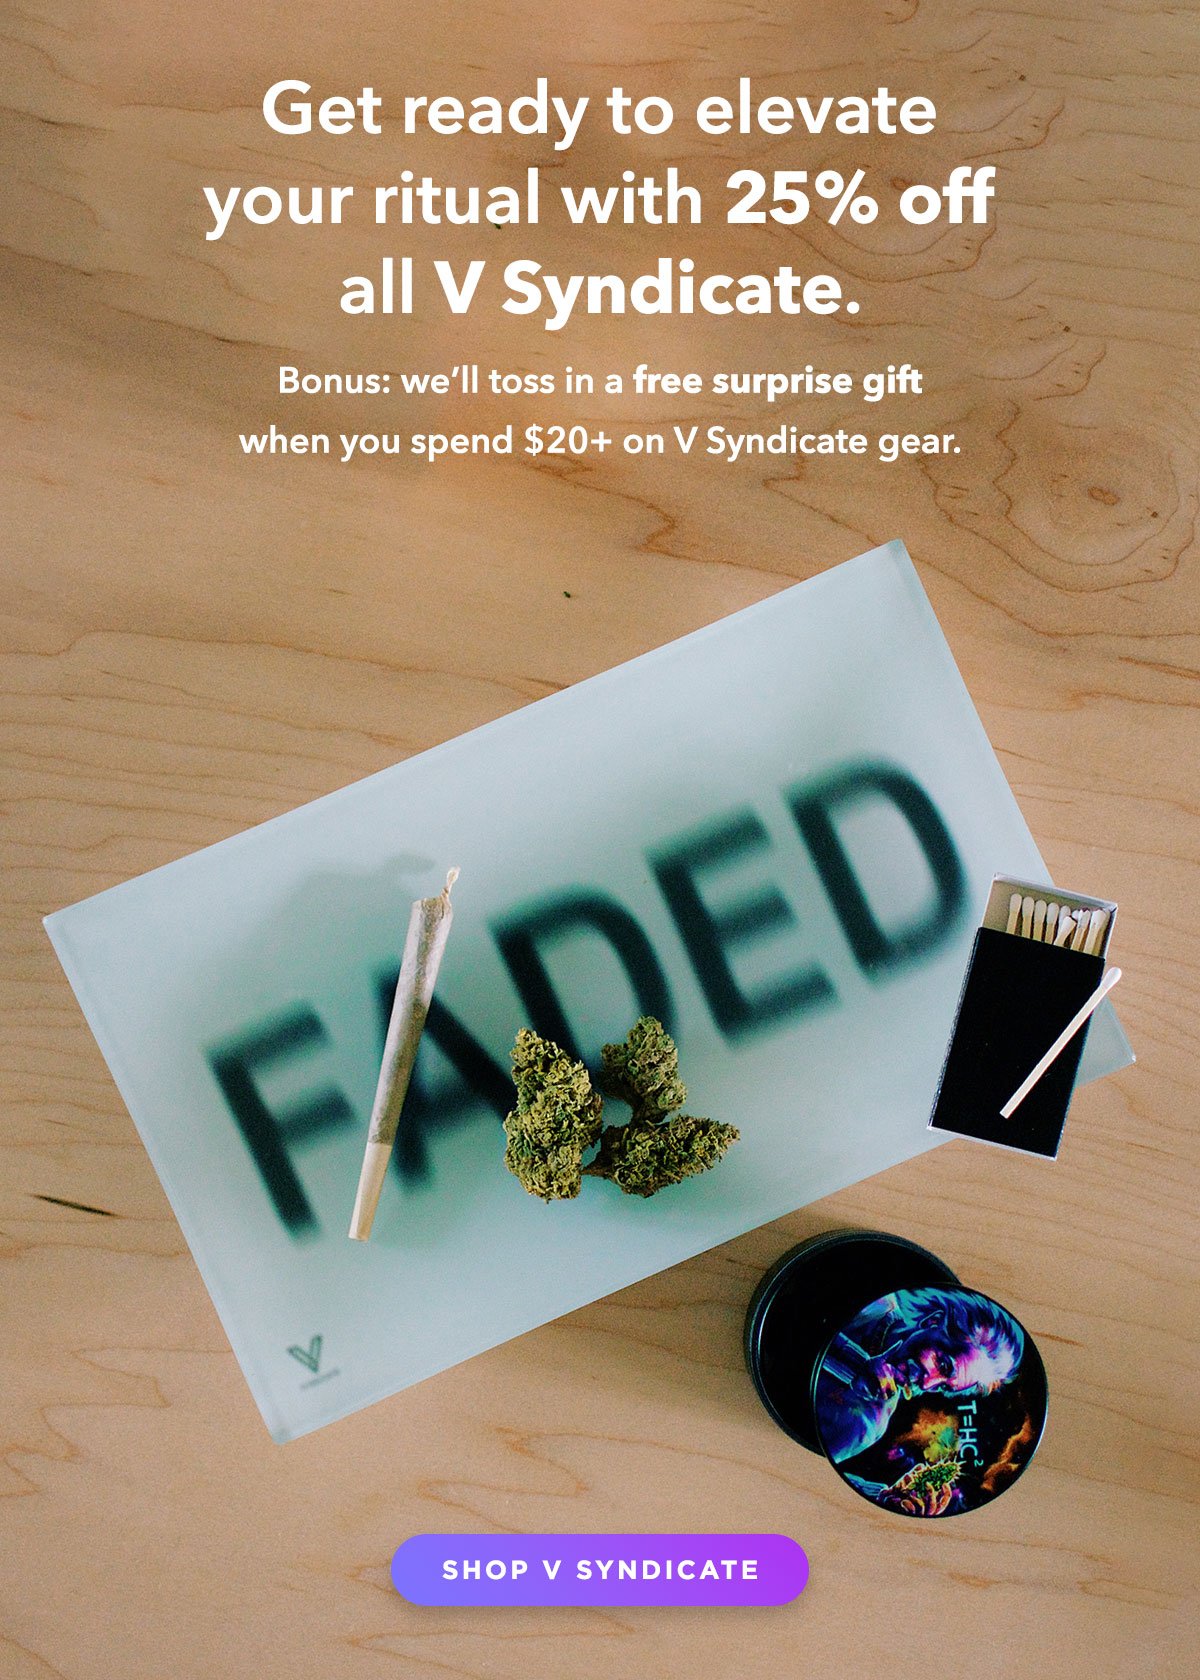 Get ready to elevate your ritual with 25% off all V Syndicate. Bonus: we’ll toss in a free surprise gift when you spend $20+ on V Syndicate gear.